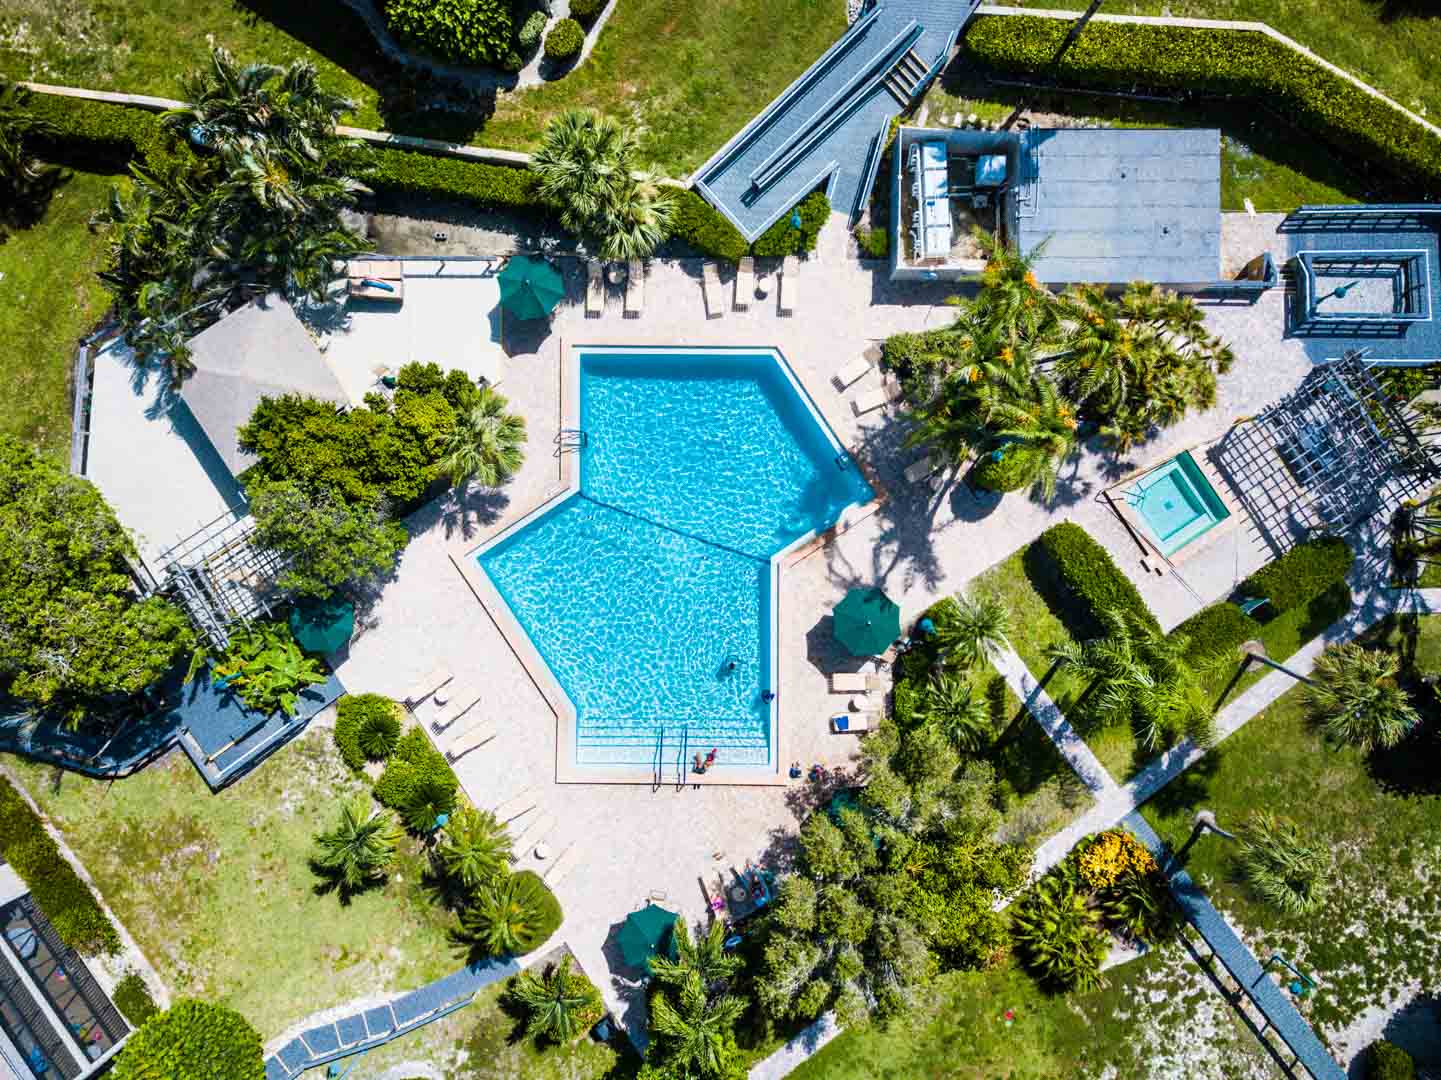 An overview of the outdoor swimming pool at VRI's Sanibel Beach Club in Sanibel Island, Florida.